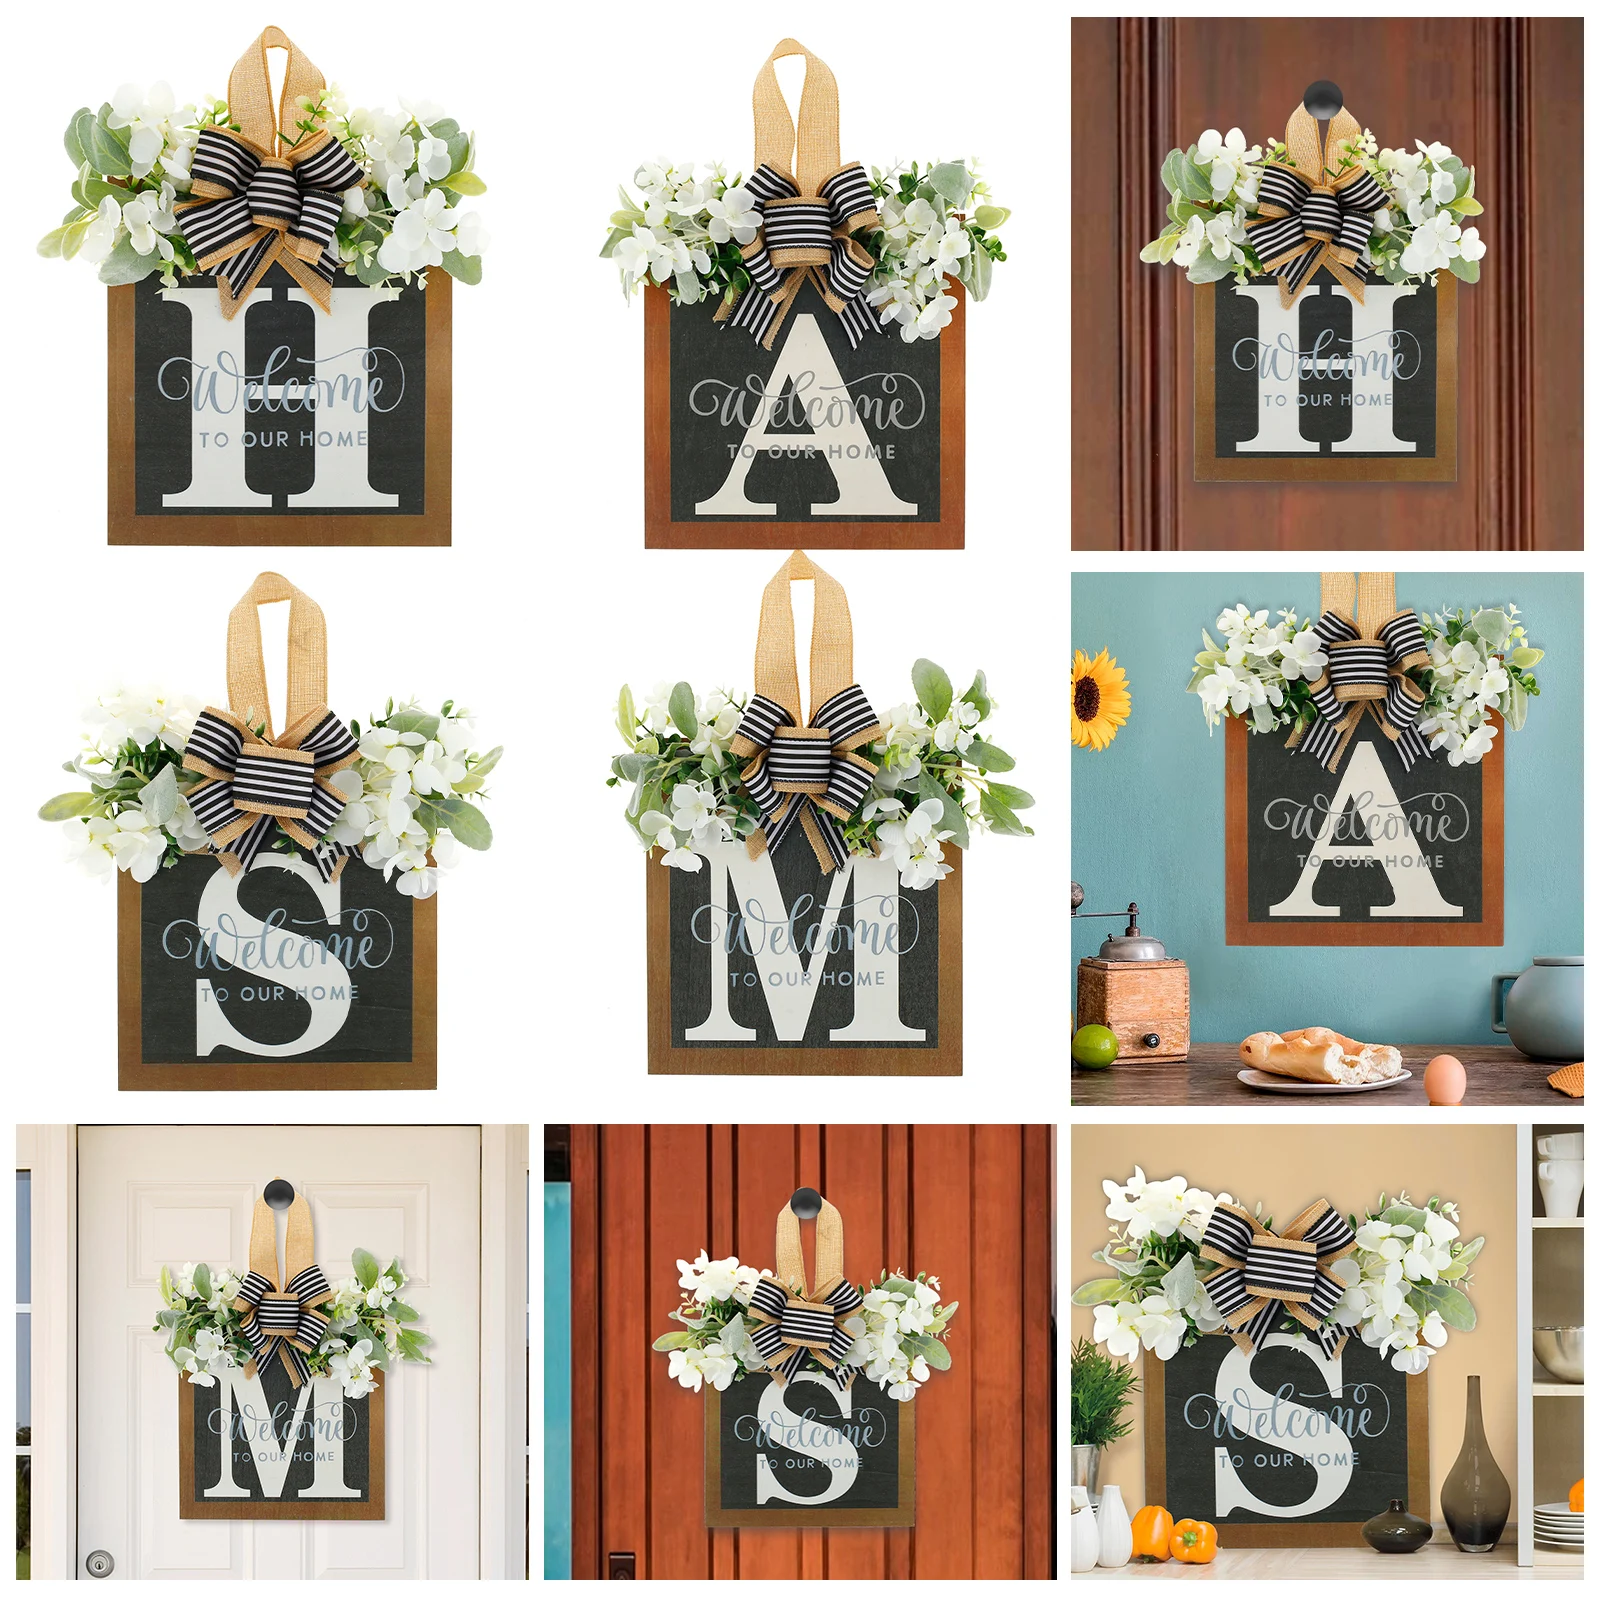 

Last Name Front Door Wreath Creative Last Name Welcome Sign Rustic Letter Farmhouse Wreath with Bow Tie and Eucalyptus Wreath